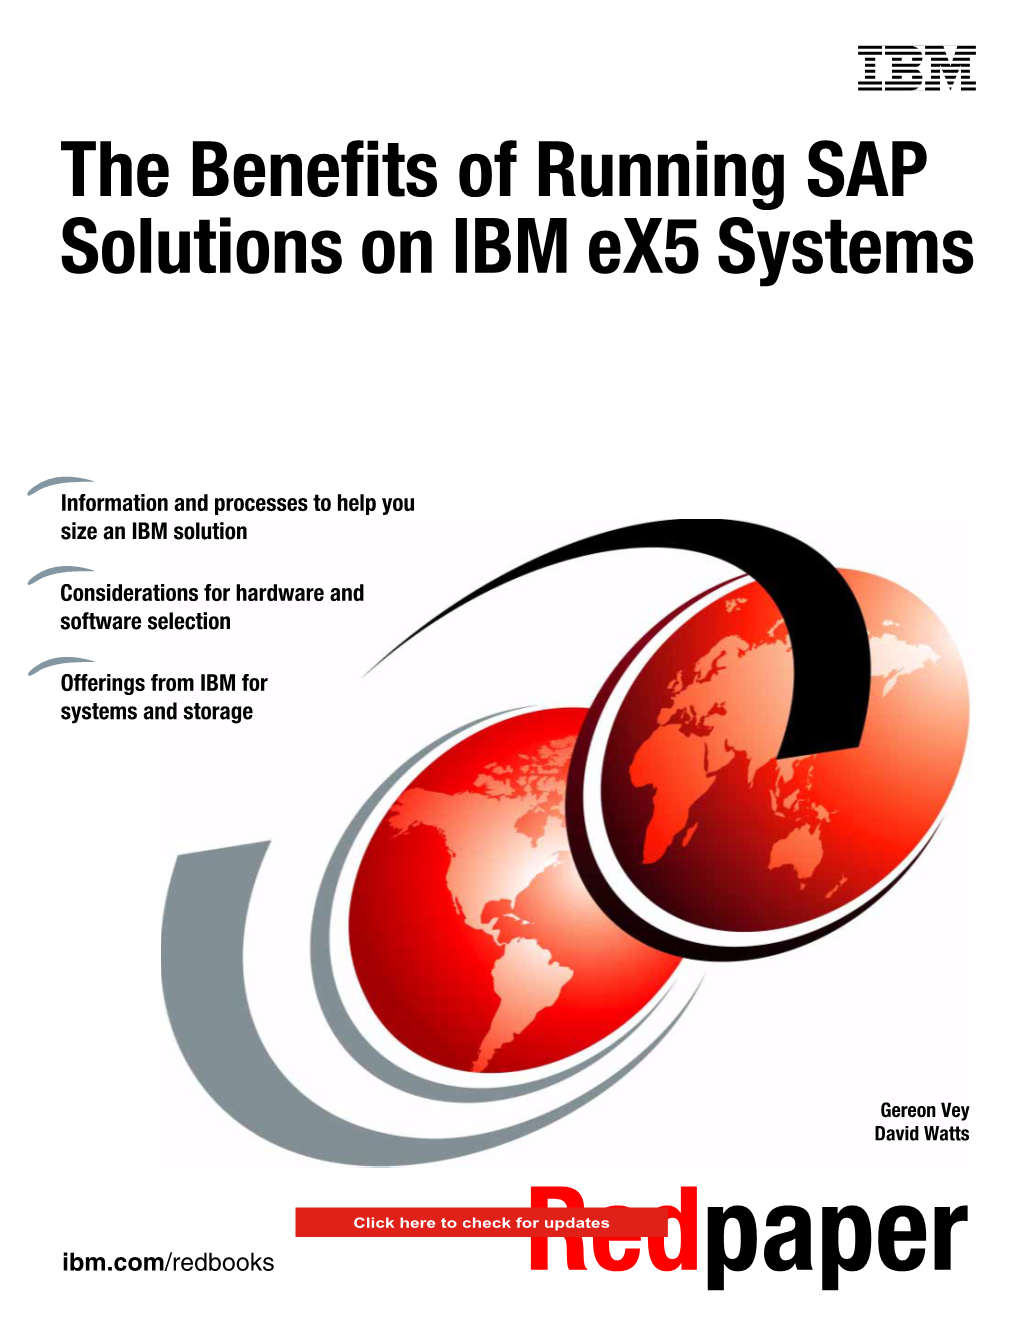 The Benefits of Running SAP Solutions on IBM Ex5 Systems